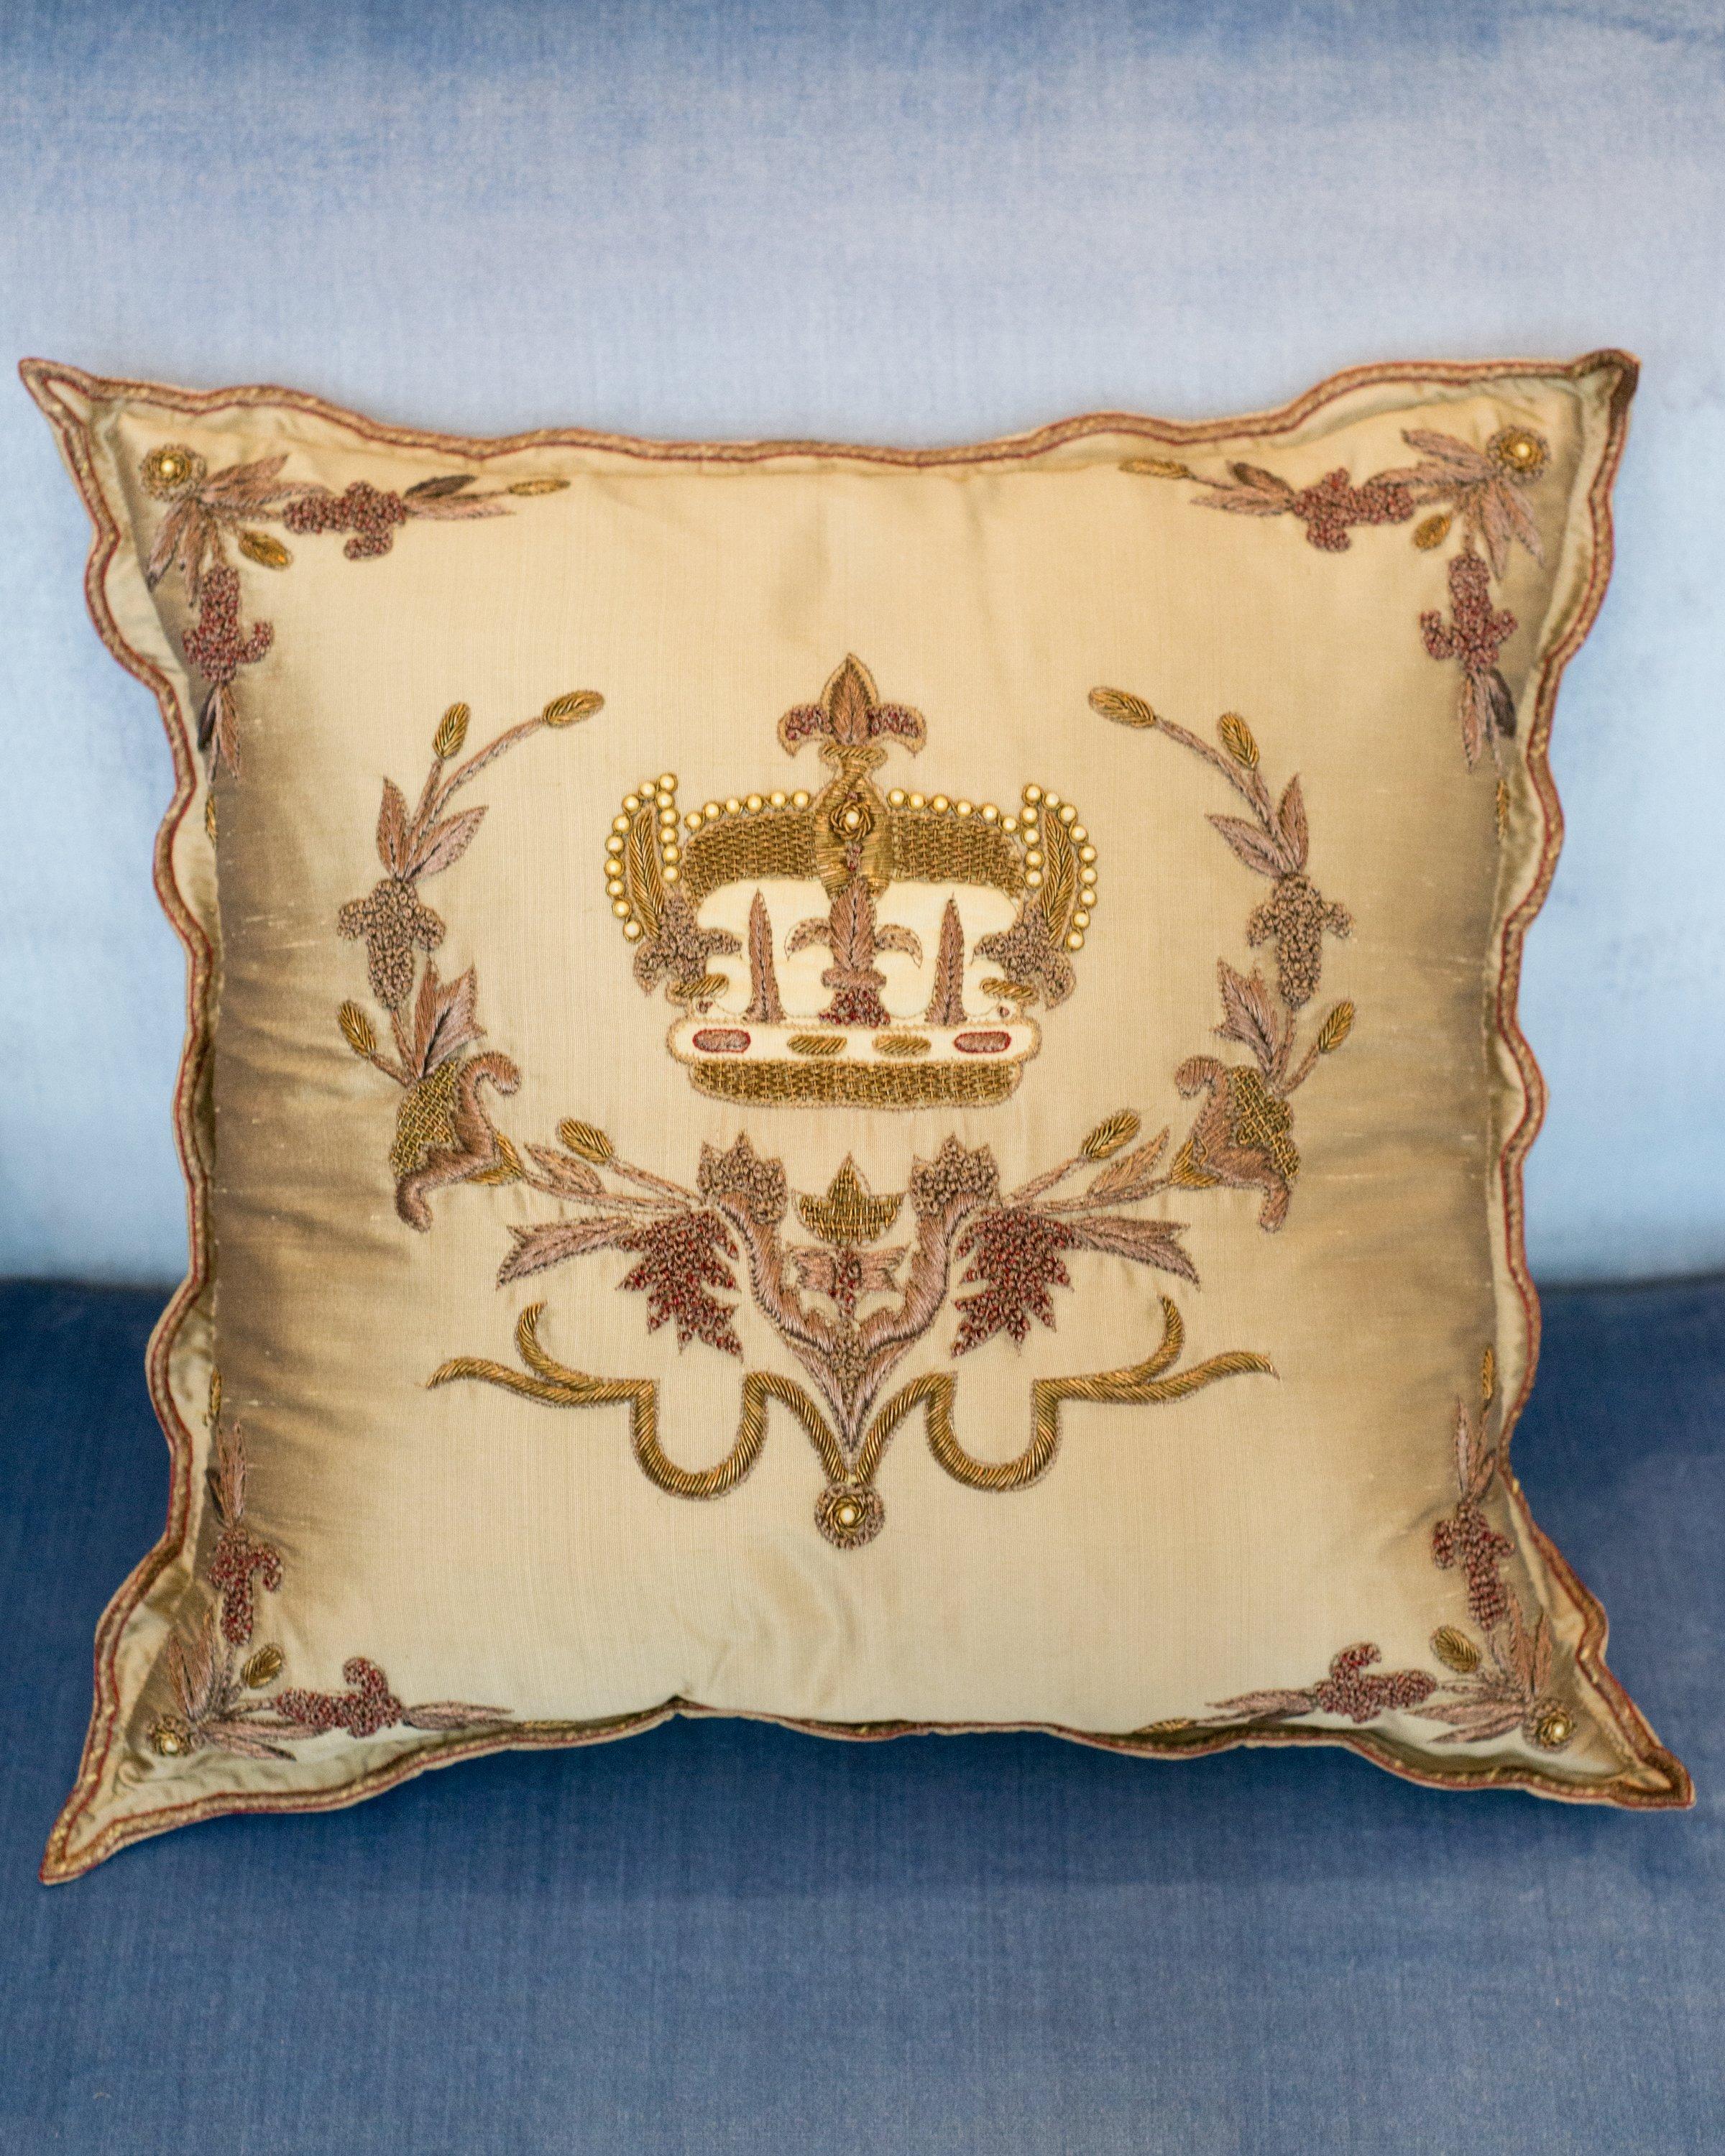 A contemporary gold silk pillow with a metallic embroidered crown and flange, made in Italy.